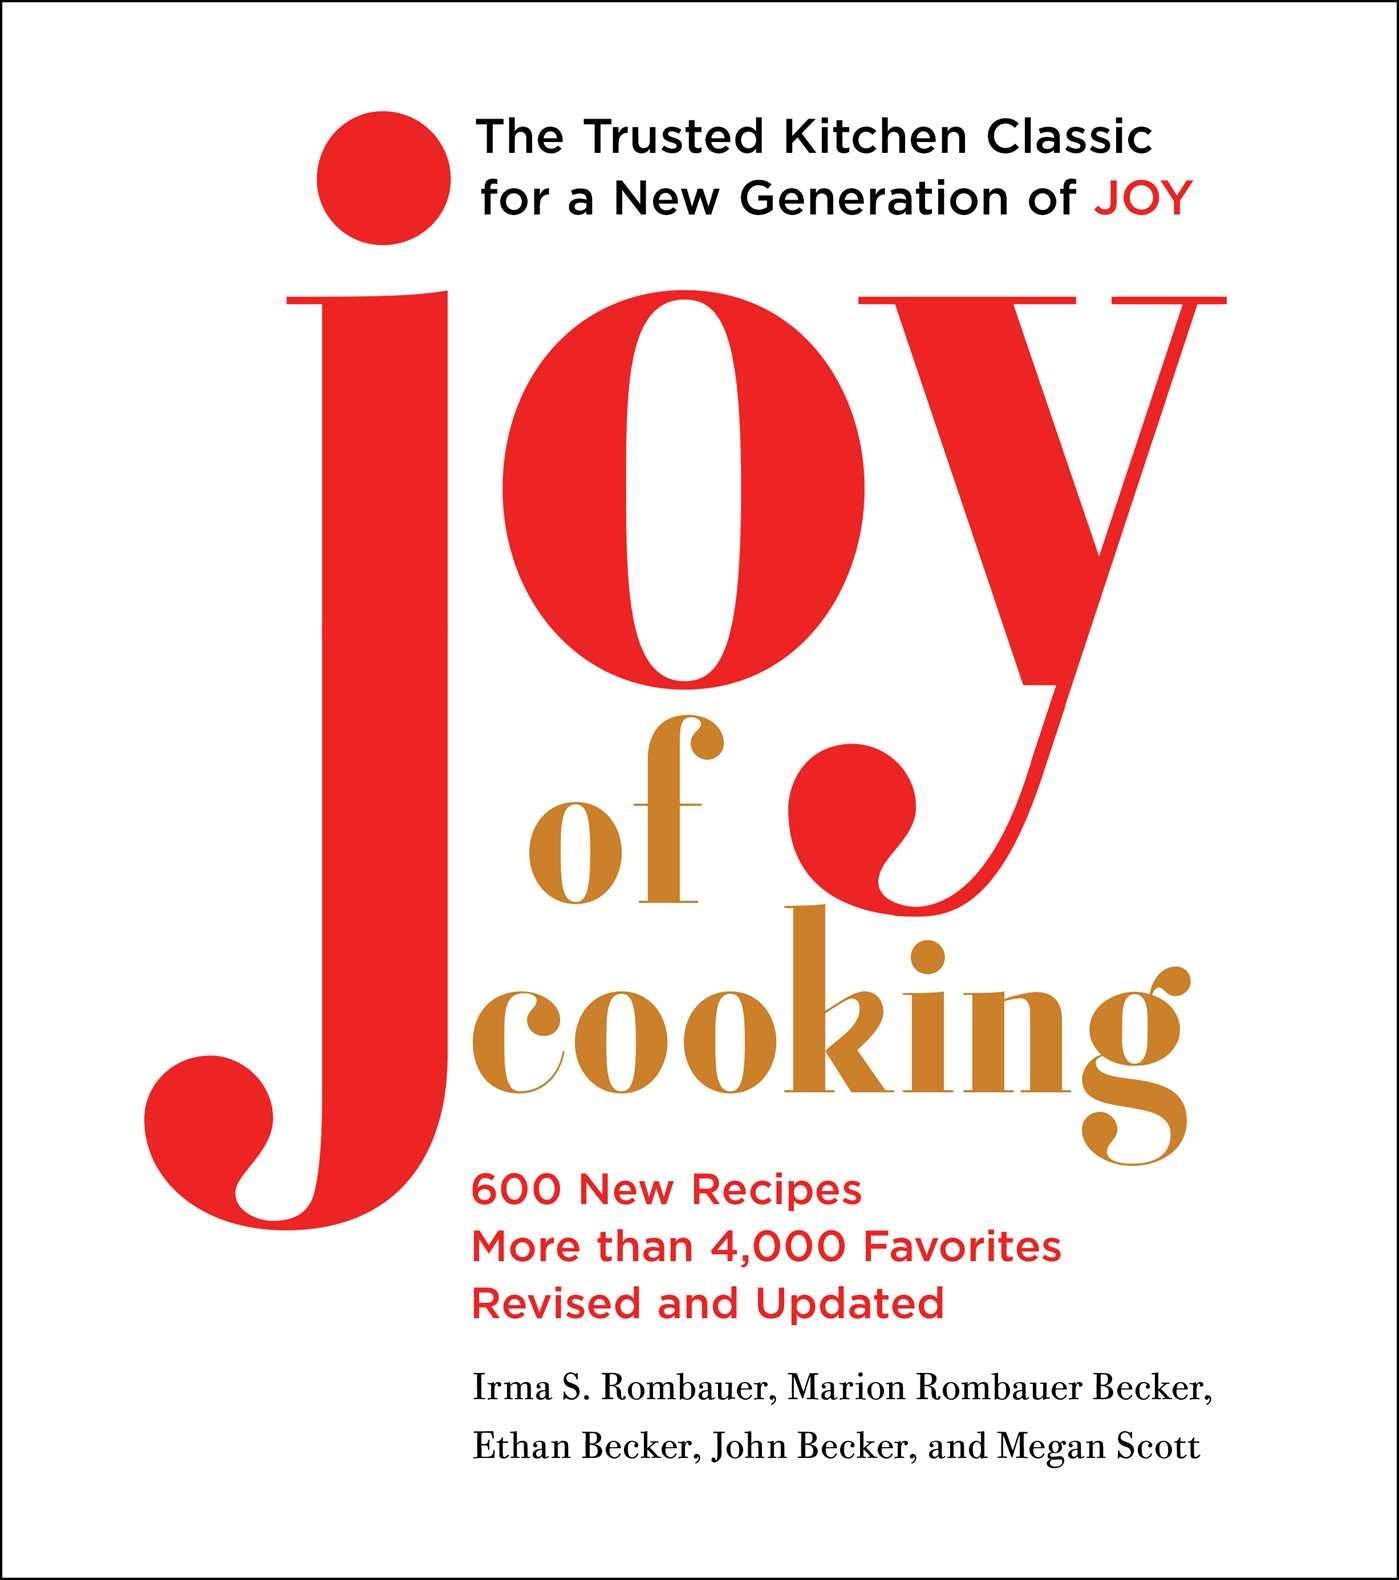 Joy of Cooking: 2019 Edition Fully Revised and Updated (John Becker, Megan Scott)